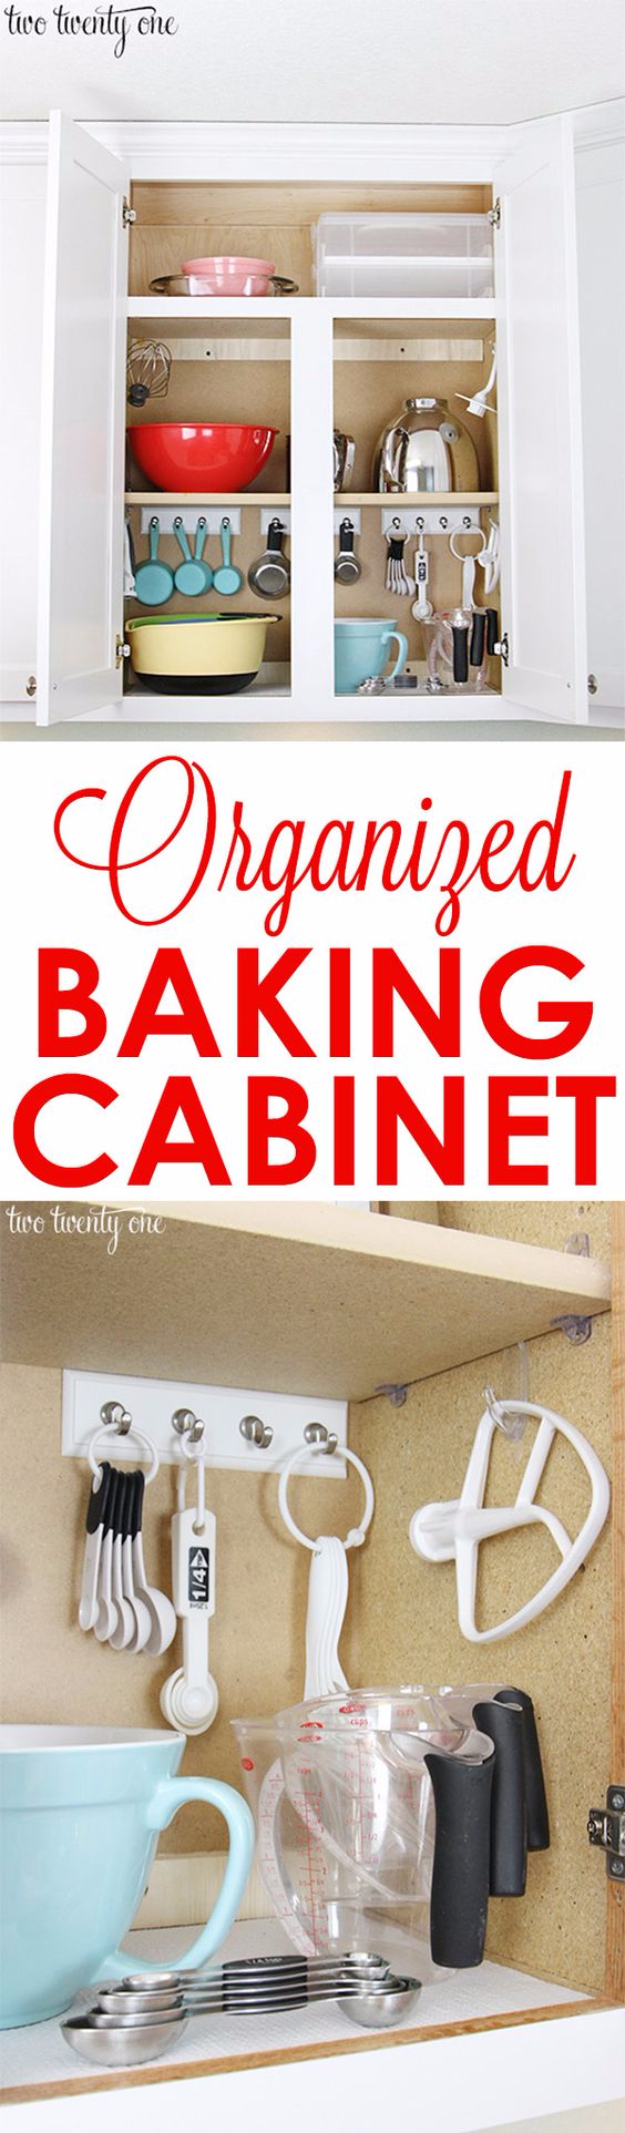 Best Organizing Ideas for the New Year - Organized Baking Cabinet - Resolutions for Getting Organized - DIY Organizing Projects for Home, Bedroom, Closet, Bath and Kitchen - Easy Ways to Organize Shoes, Clutter, Desk and Closets - DIY Projects and Crafts for Women and Men http://diyjoy.com/best-organizing-ideas